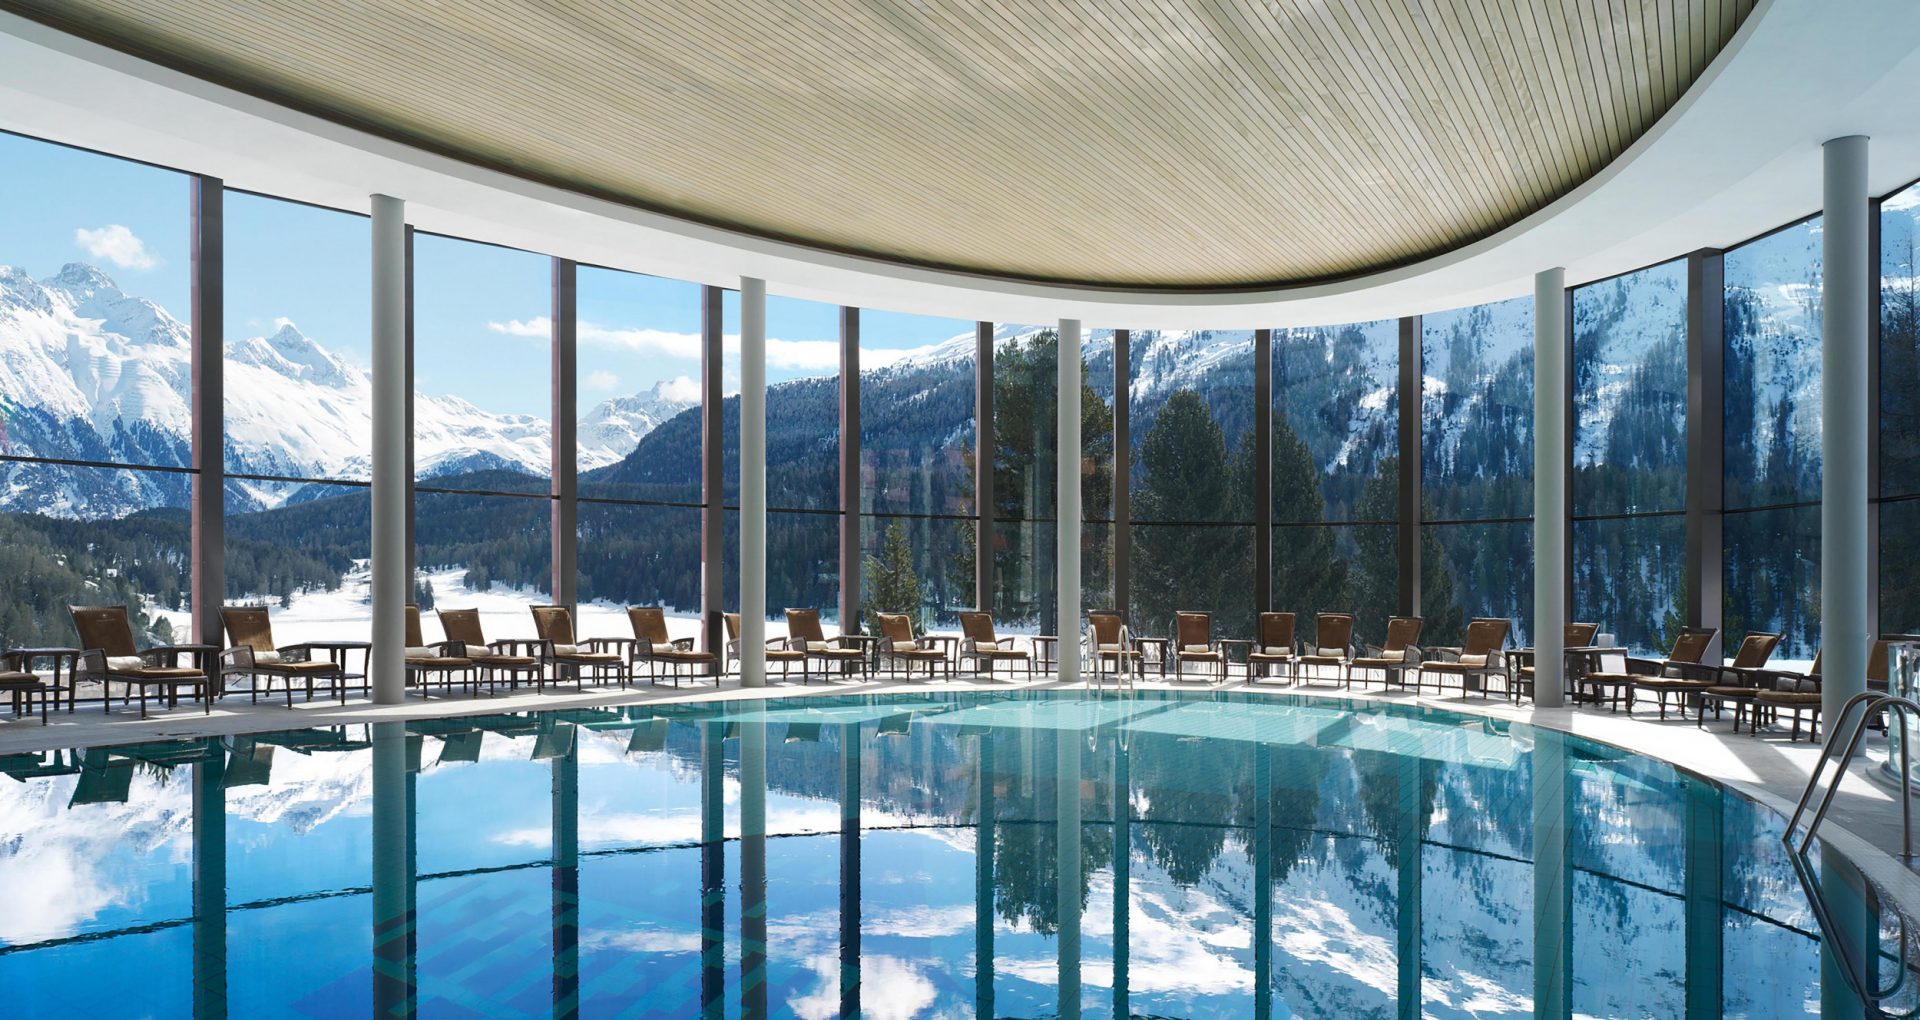 The infinity pool at the Palace Wellness spa in St. Moritz